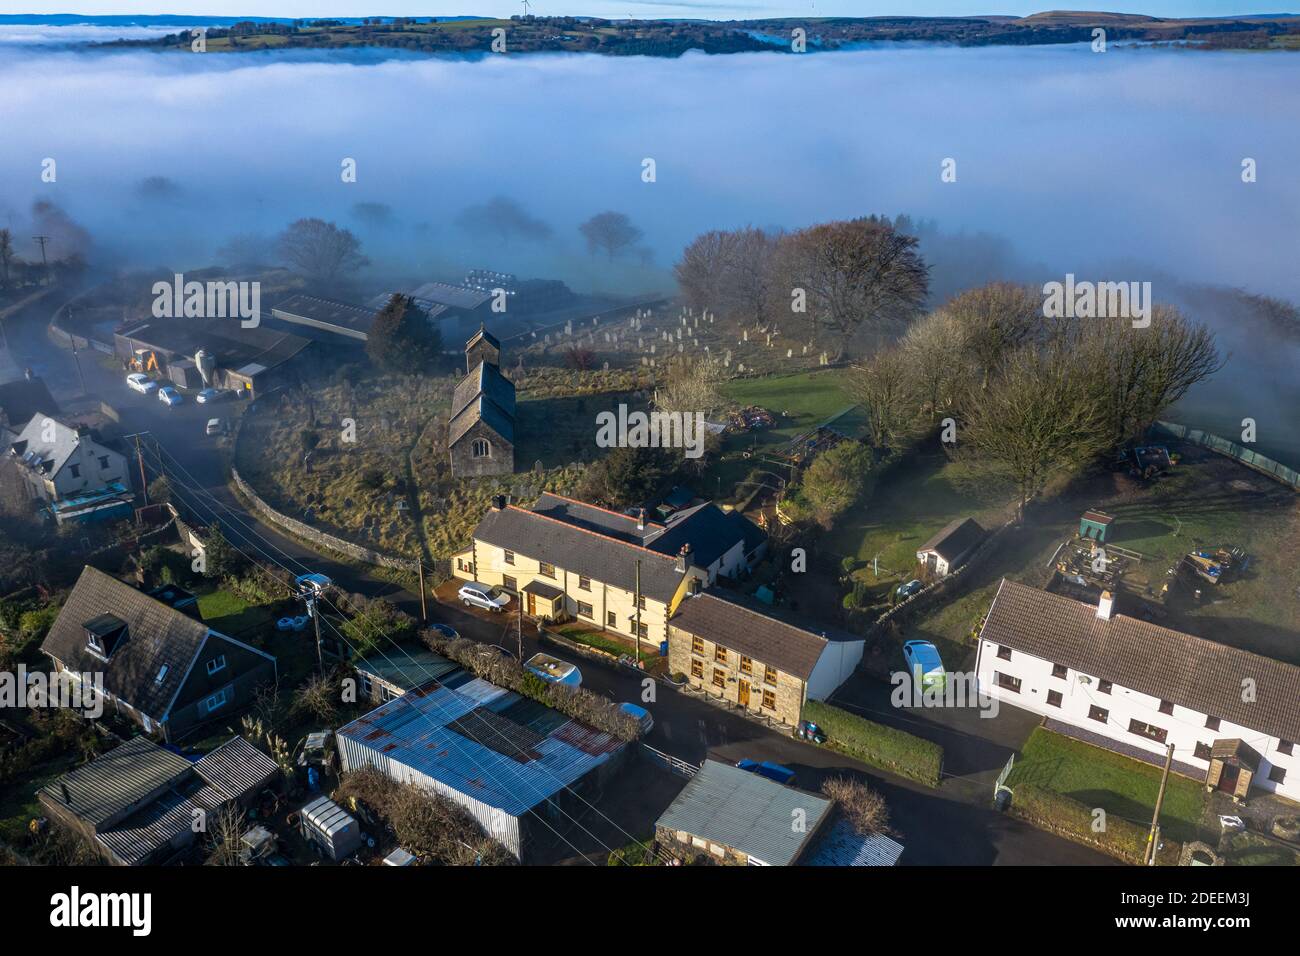 Beautiful morning of drone footage overlooking welsh sceneray small village with fog sheet covering the lower valleys in south wales uk. Stock Photo